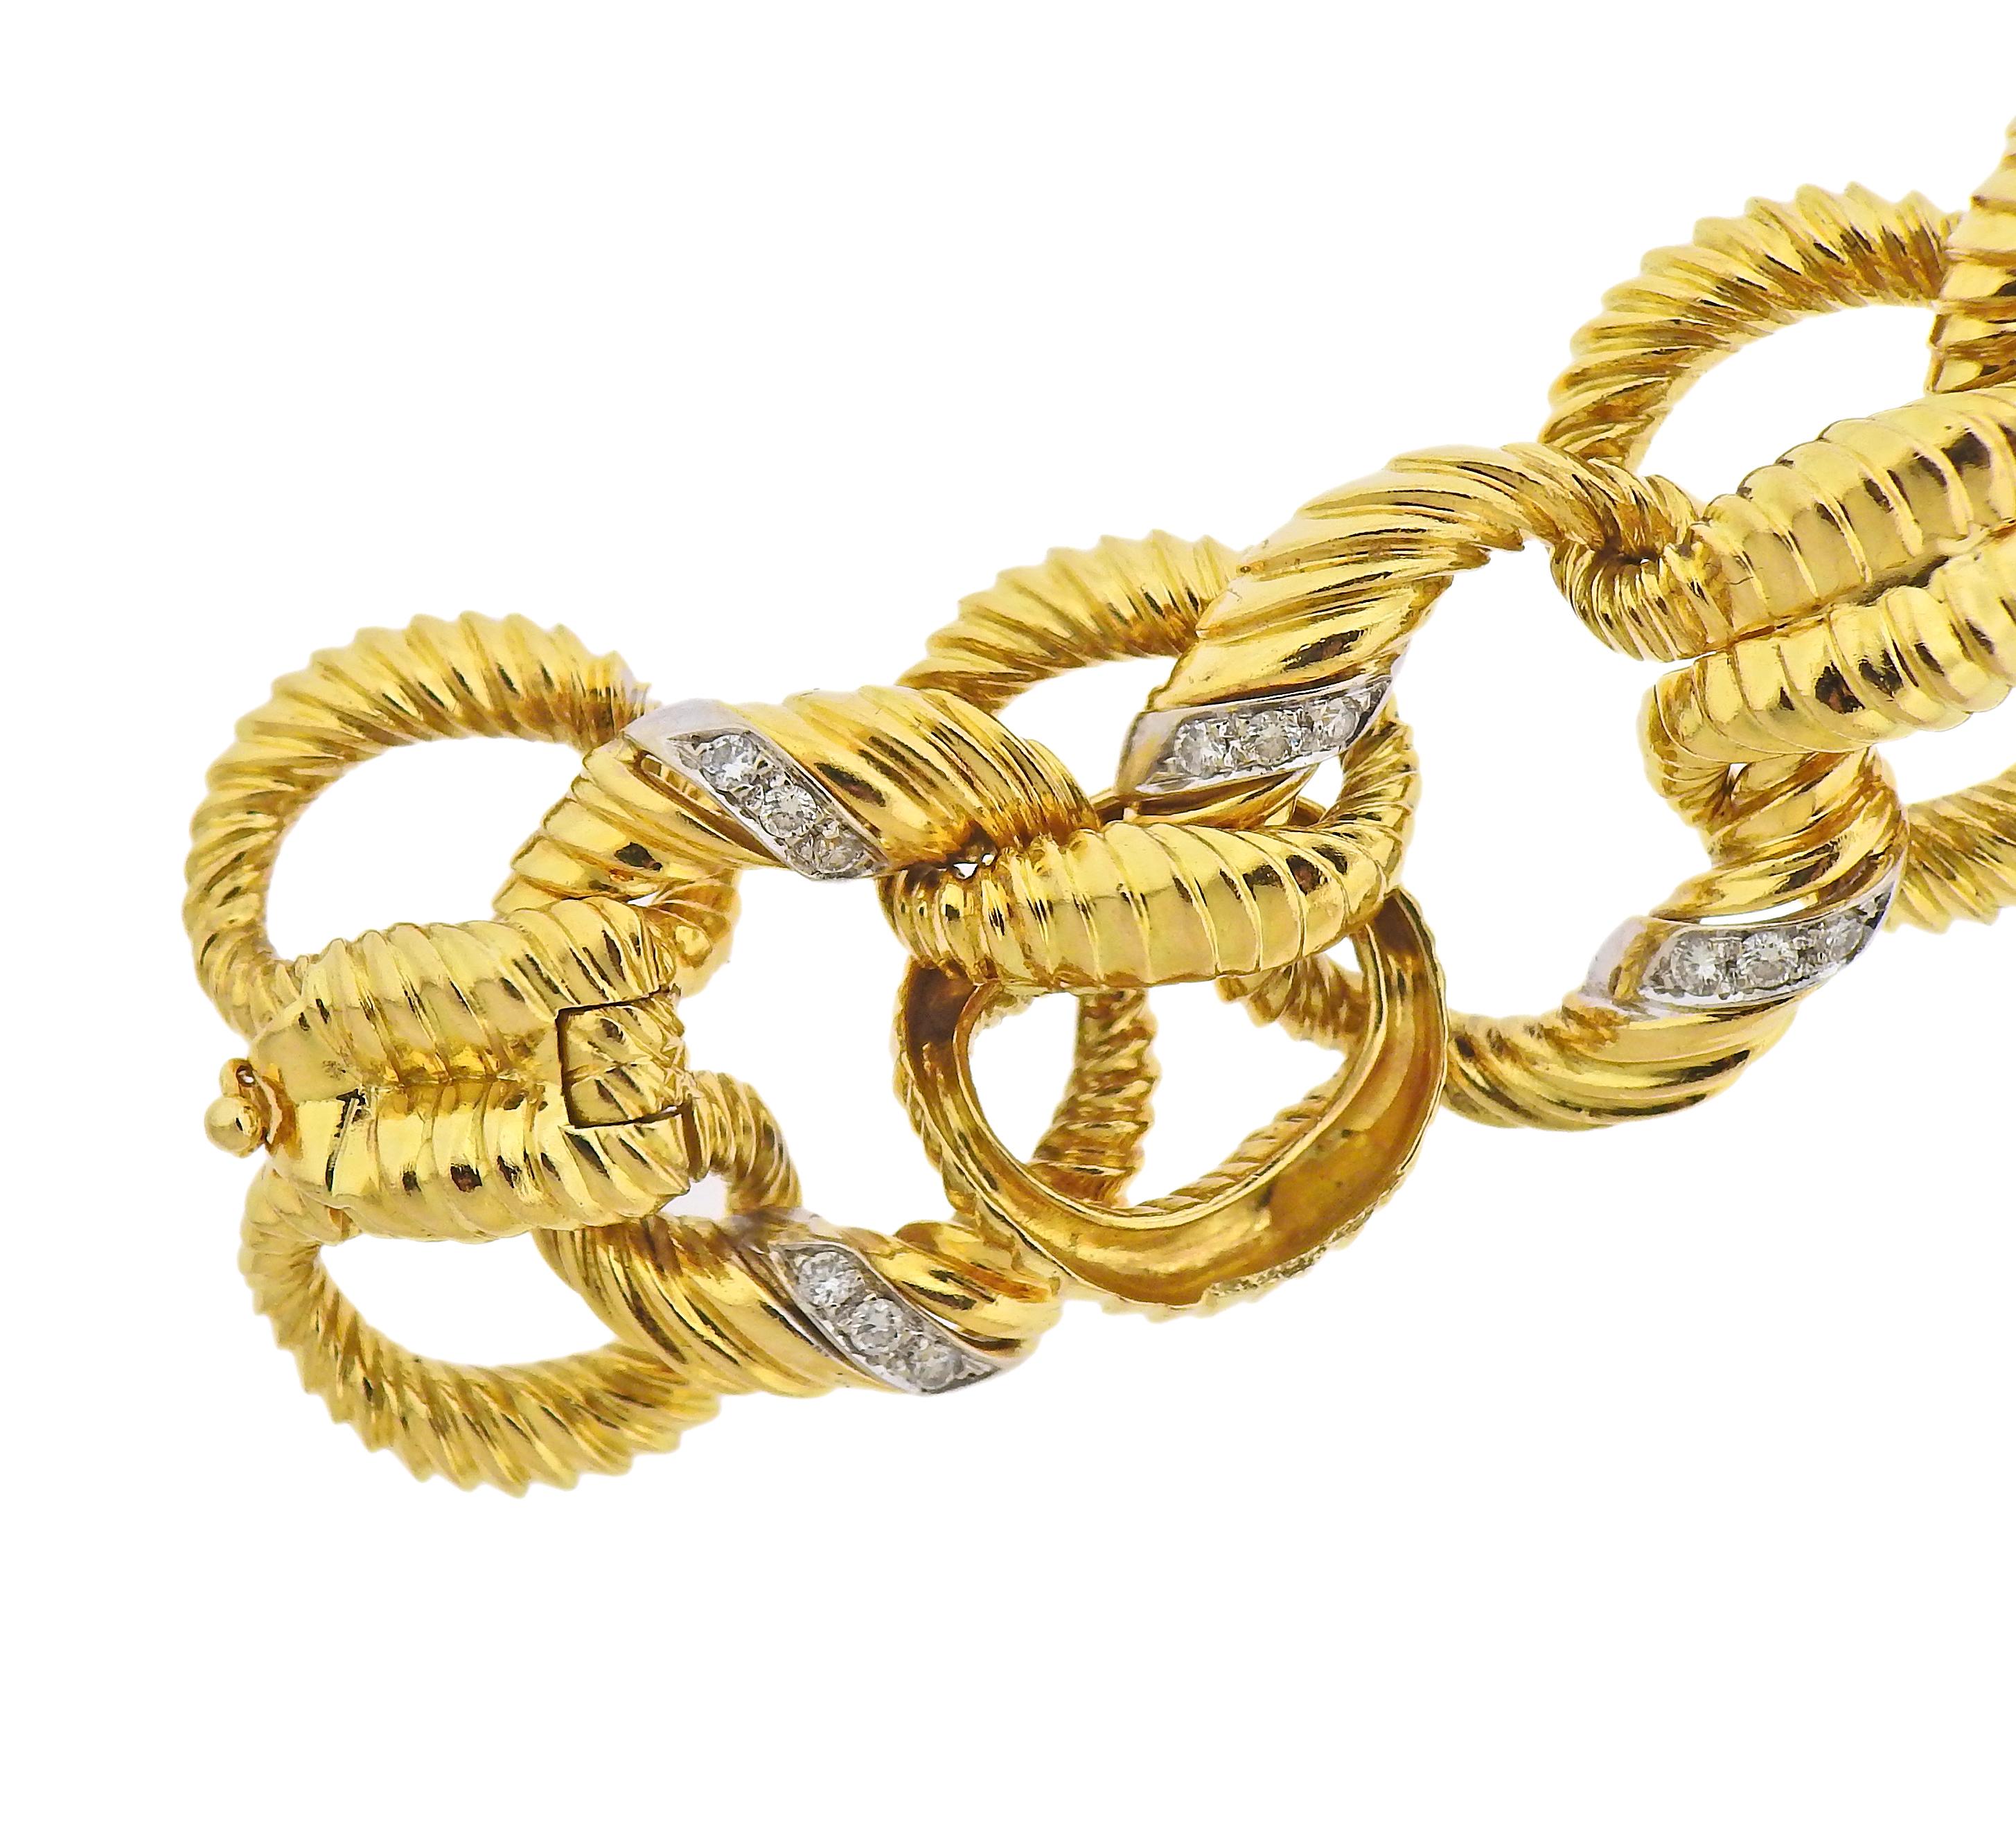 1960s Diamond Gold Link Bracelet In Excellent Condition For Sale In New York, NY